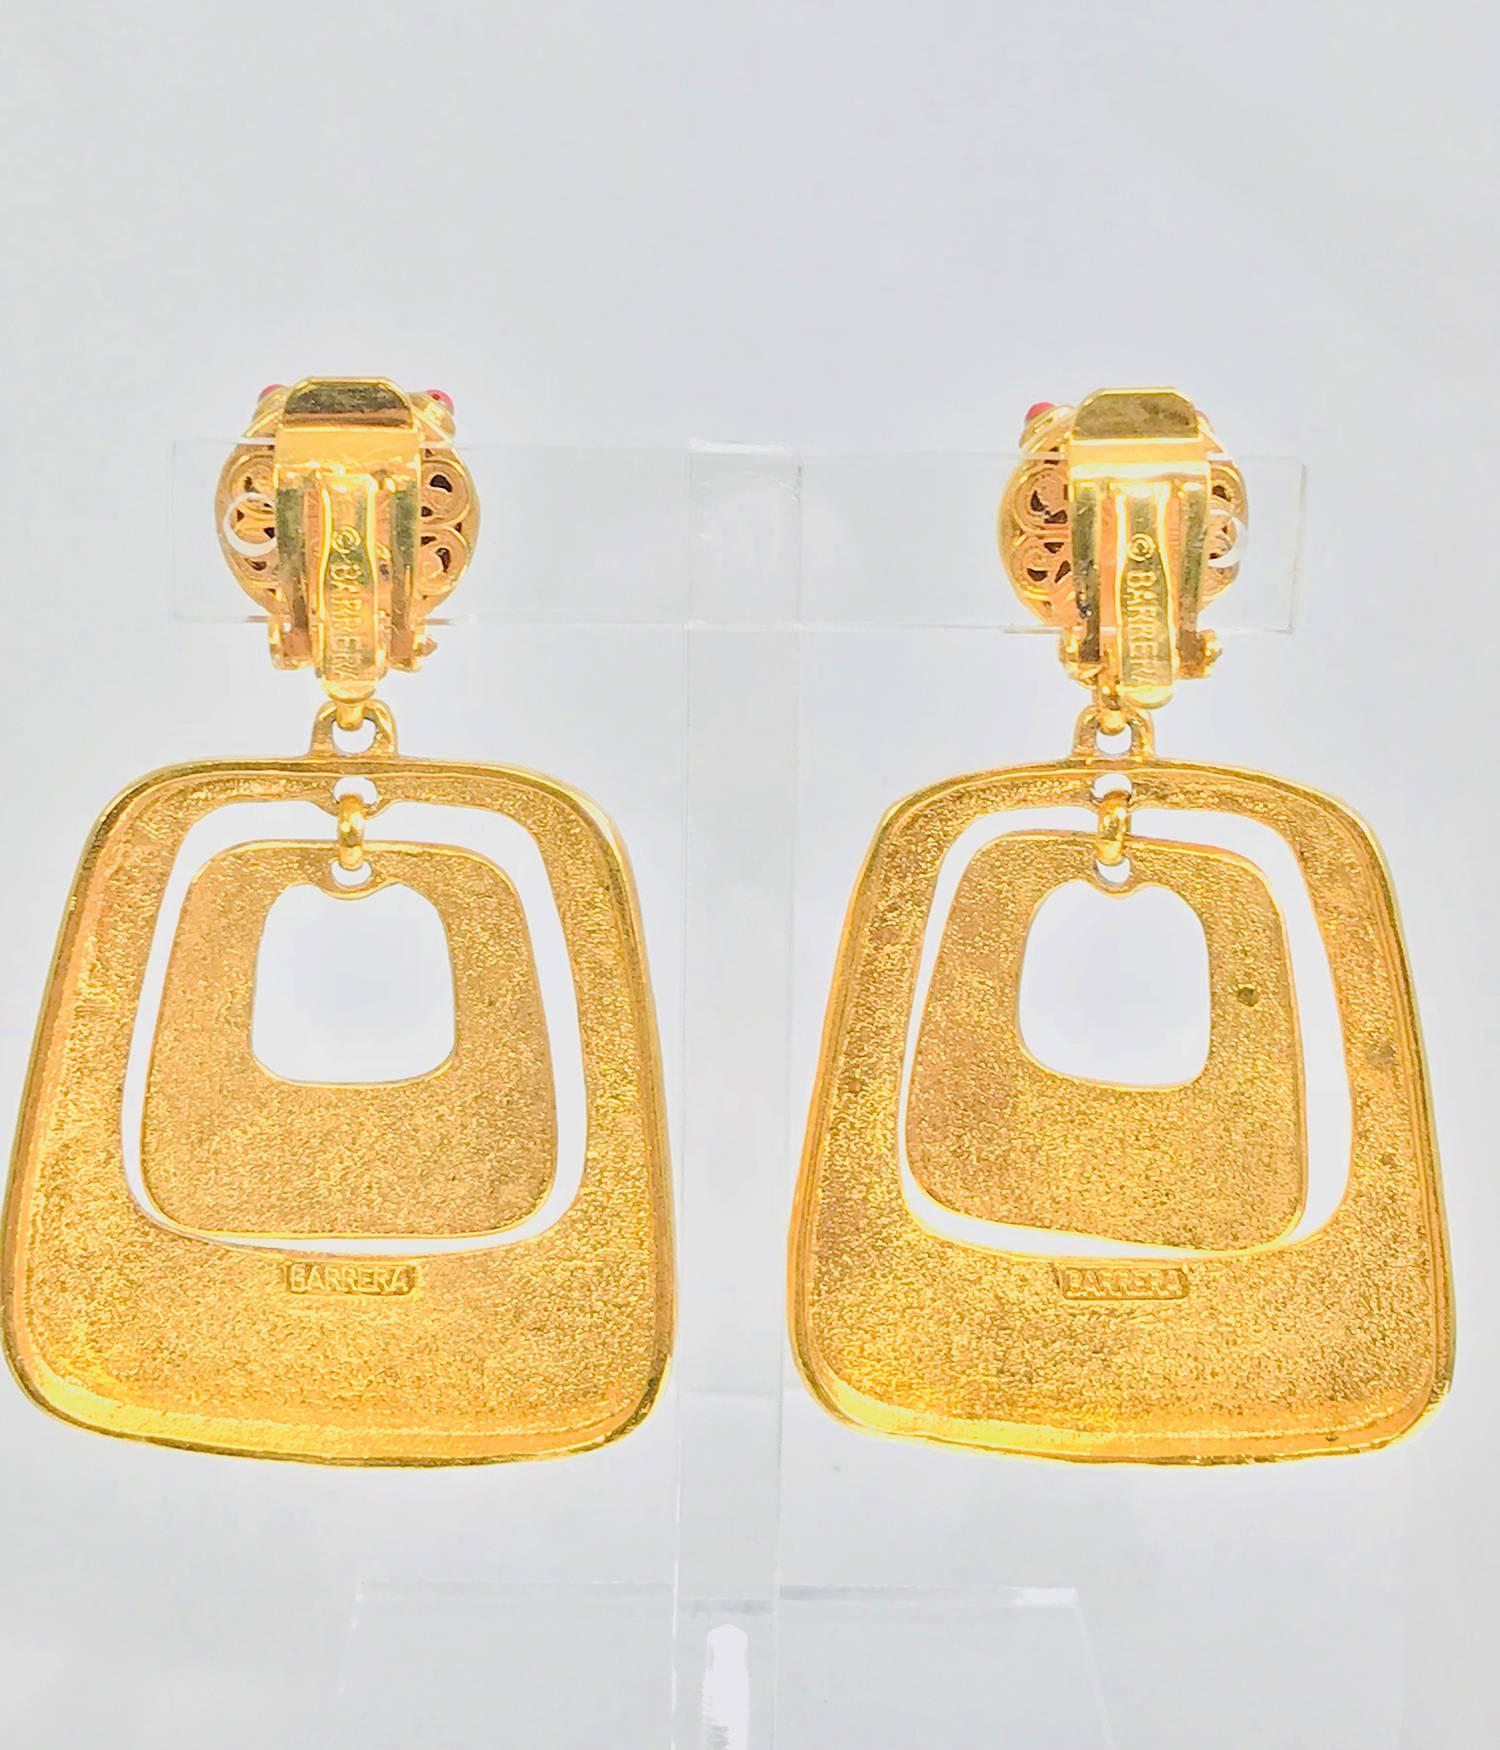 Jose and Maria Berrera stone set gold door knocker earrings...These gorgeous earrings are set with rich russet and gold hue cabochon stones and glittery gold stones...Approximately 2 1/2